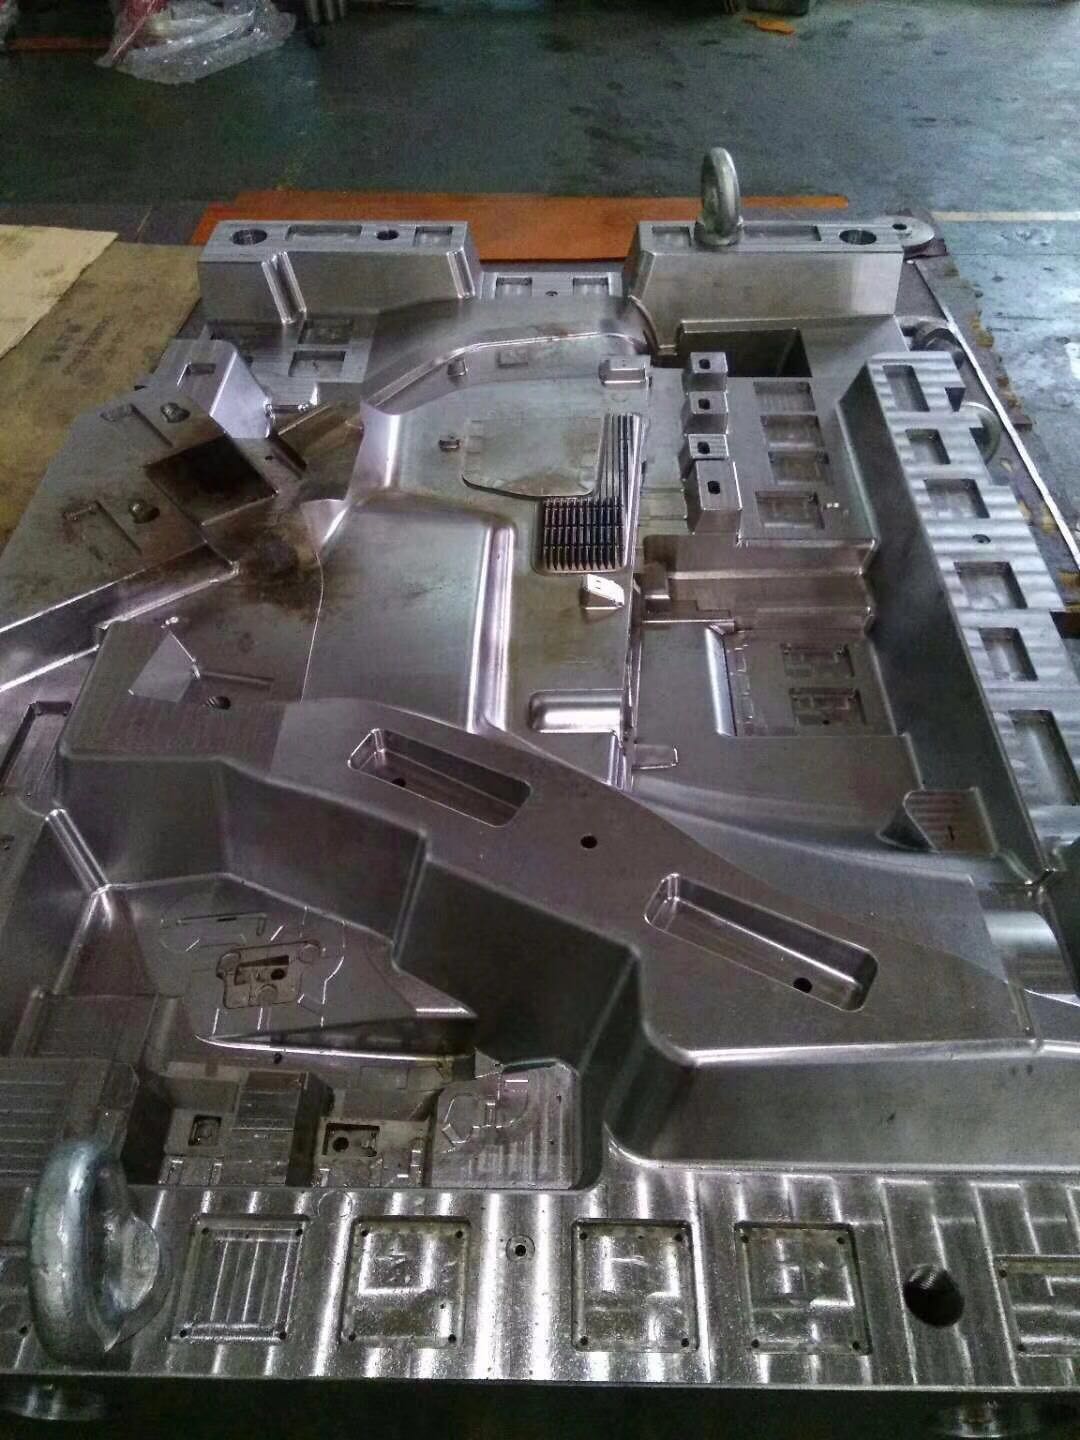 As a abs injection molded plastic parts factory,can molds be used for prototyping and mass production?